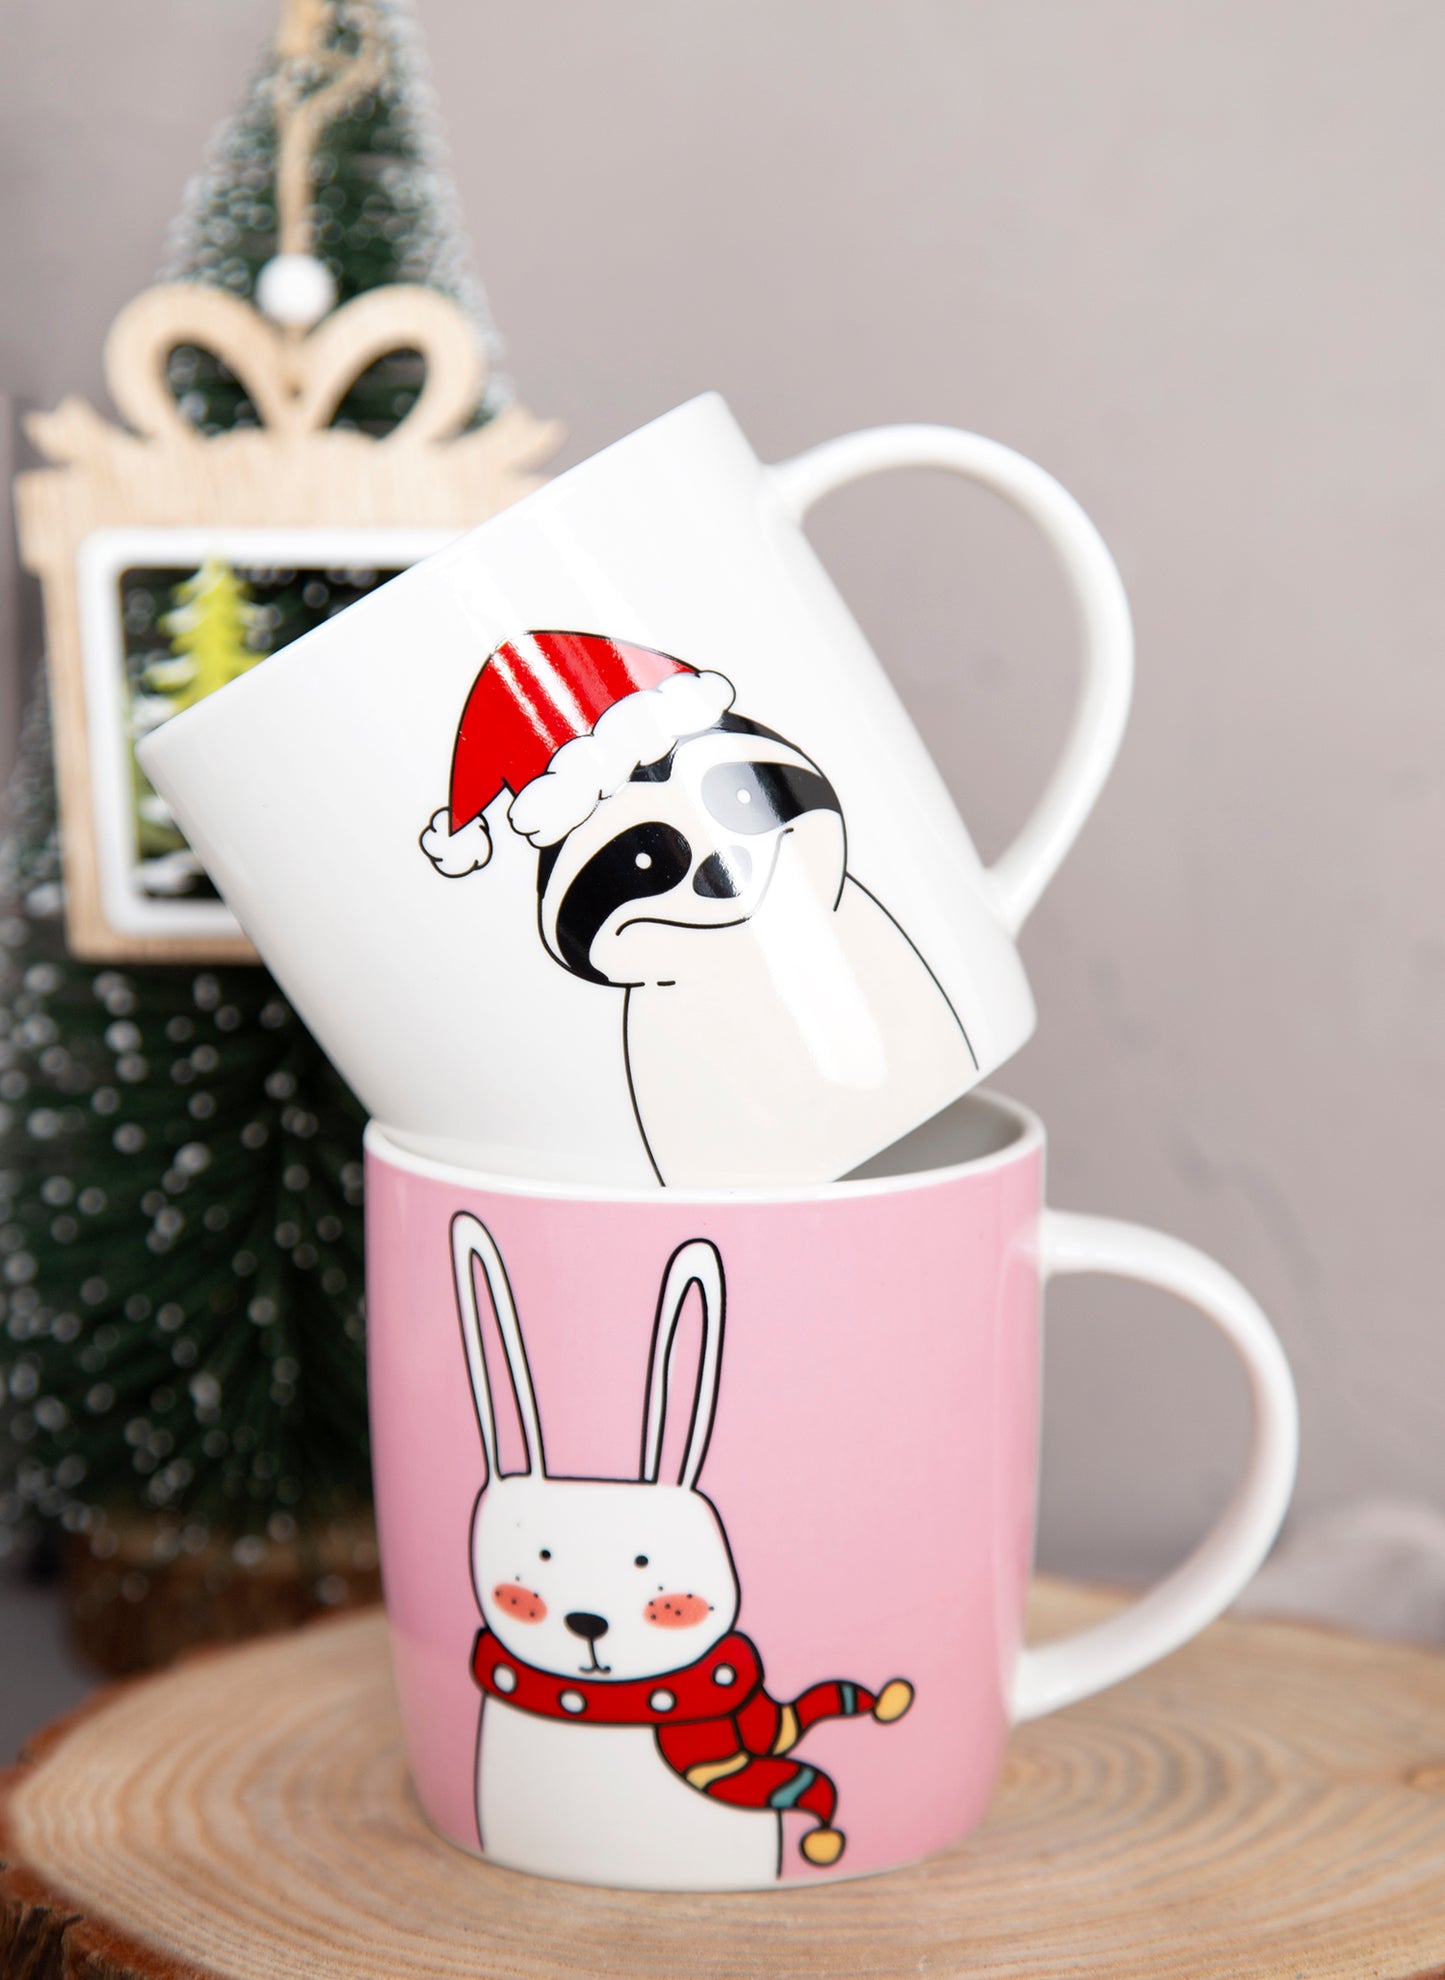 Cute animal decal cup series | Item NO.: 29C-007